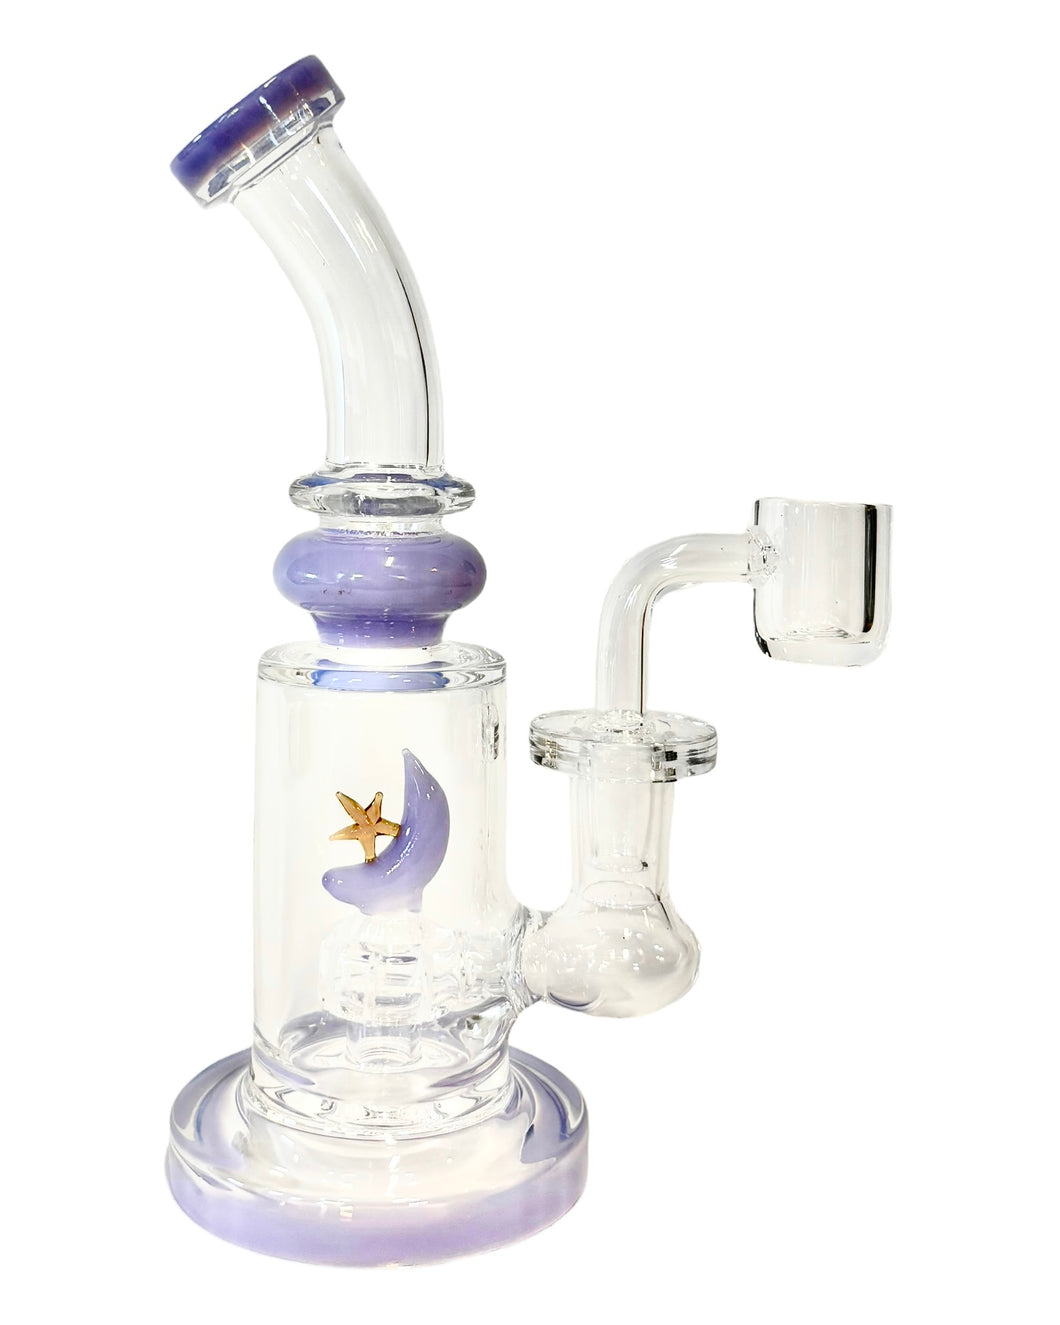 A Star and Moon Dab Rig Water Pipe.